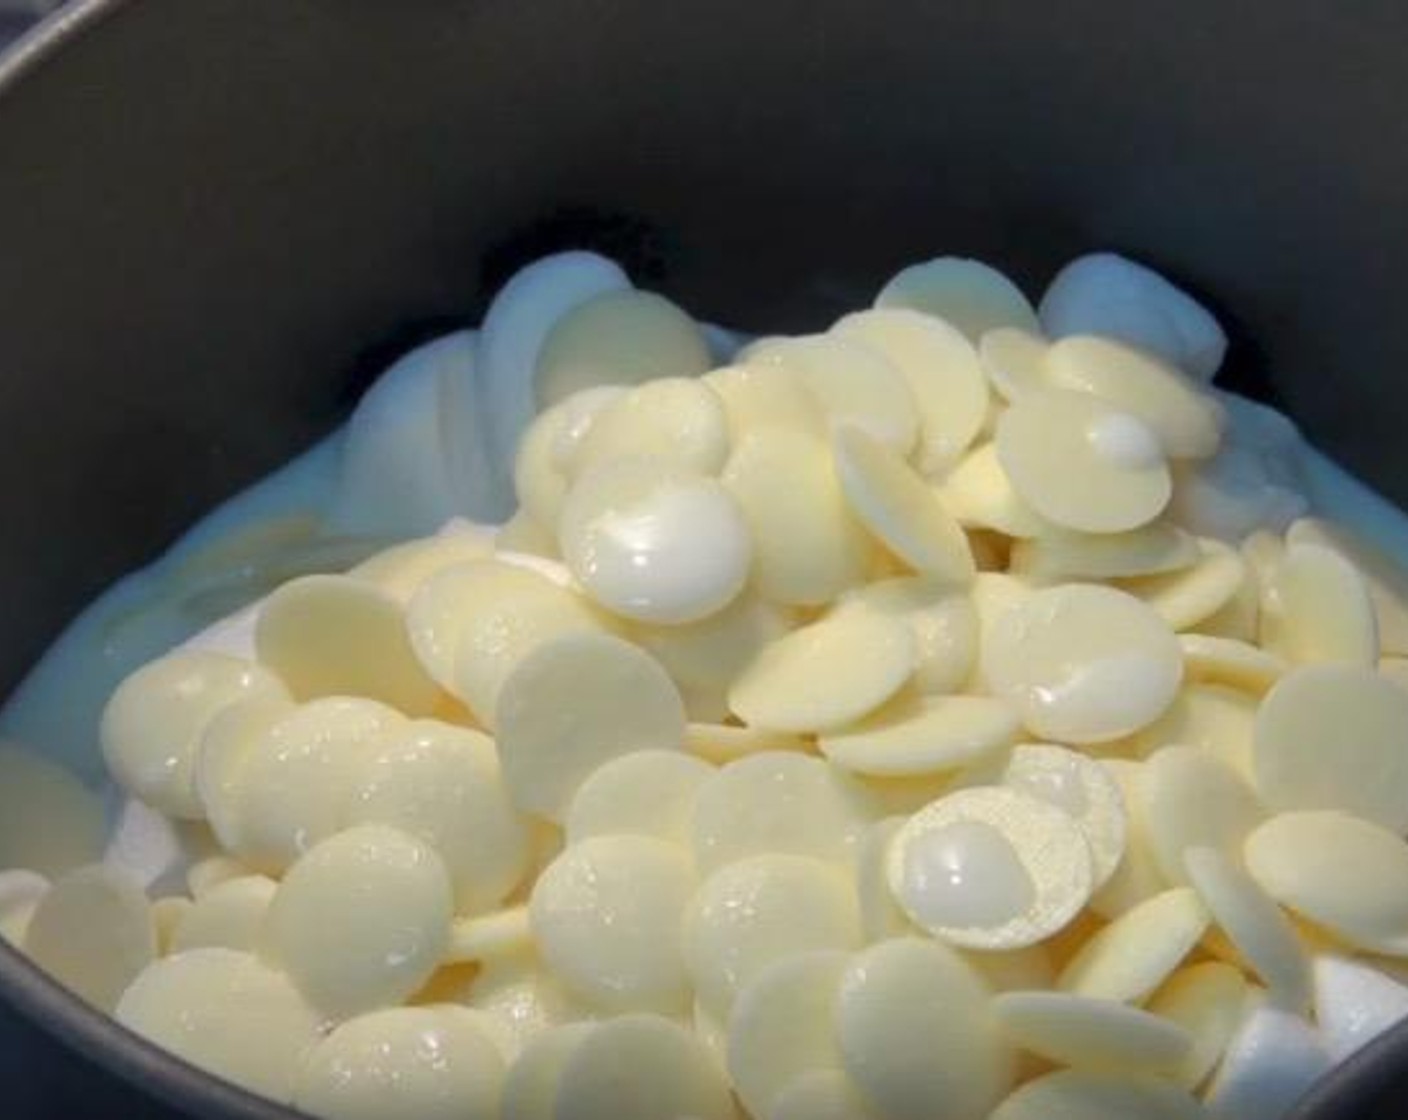 step 4 In a medium saucepan, add Marshmallows (5.5 oz), White Chocolate (1 cup) and Milk (1 cup). Over a low to medium heat, allow to melt together until smooth. Set aside to cool.